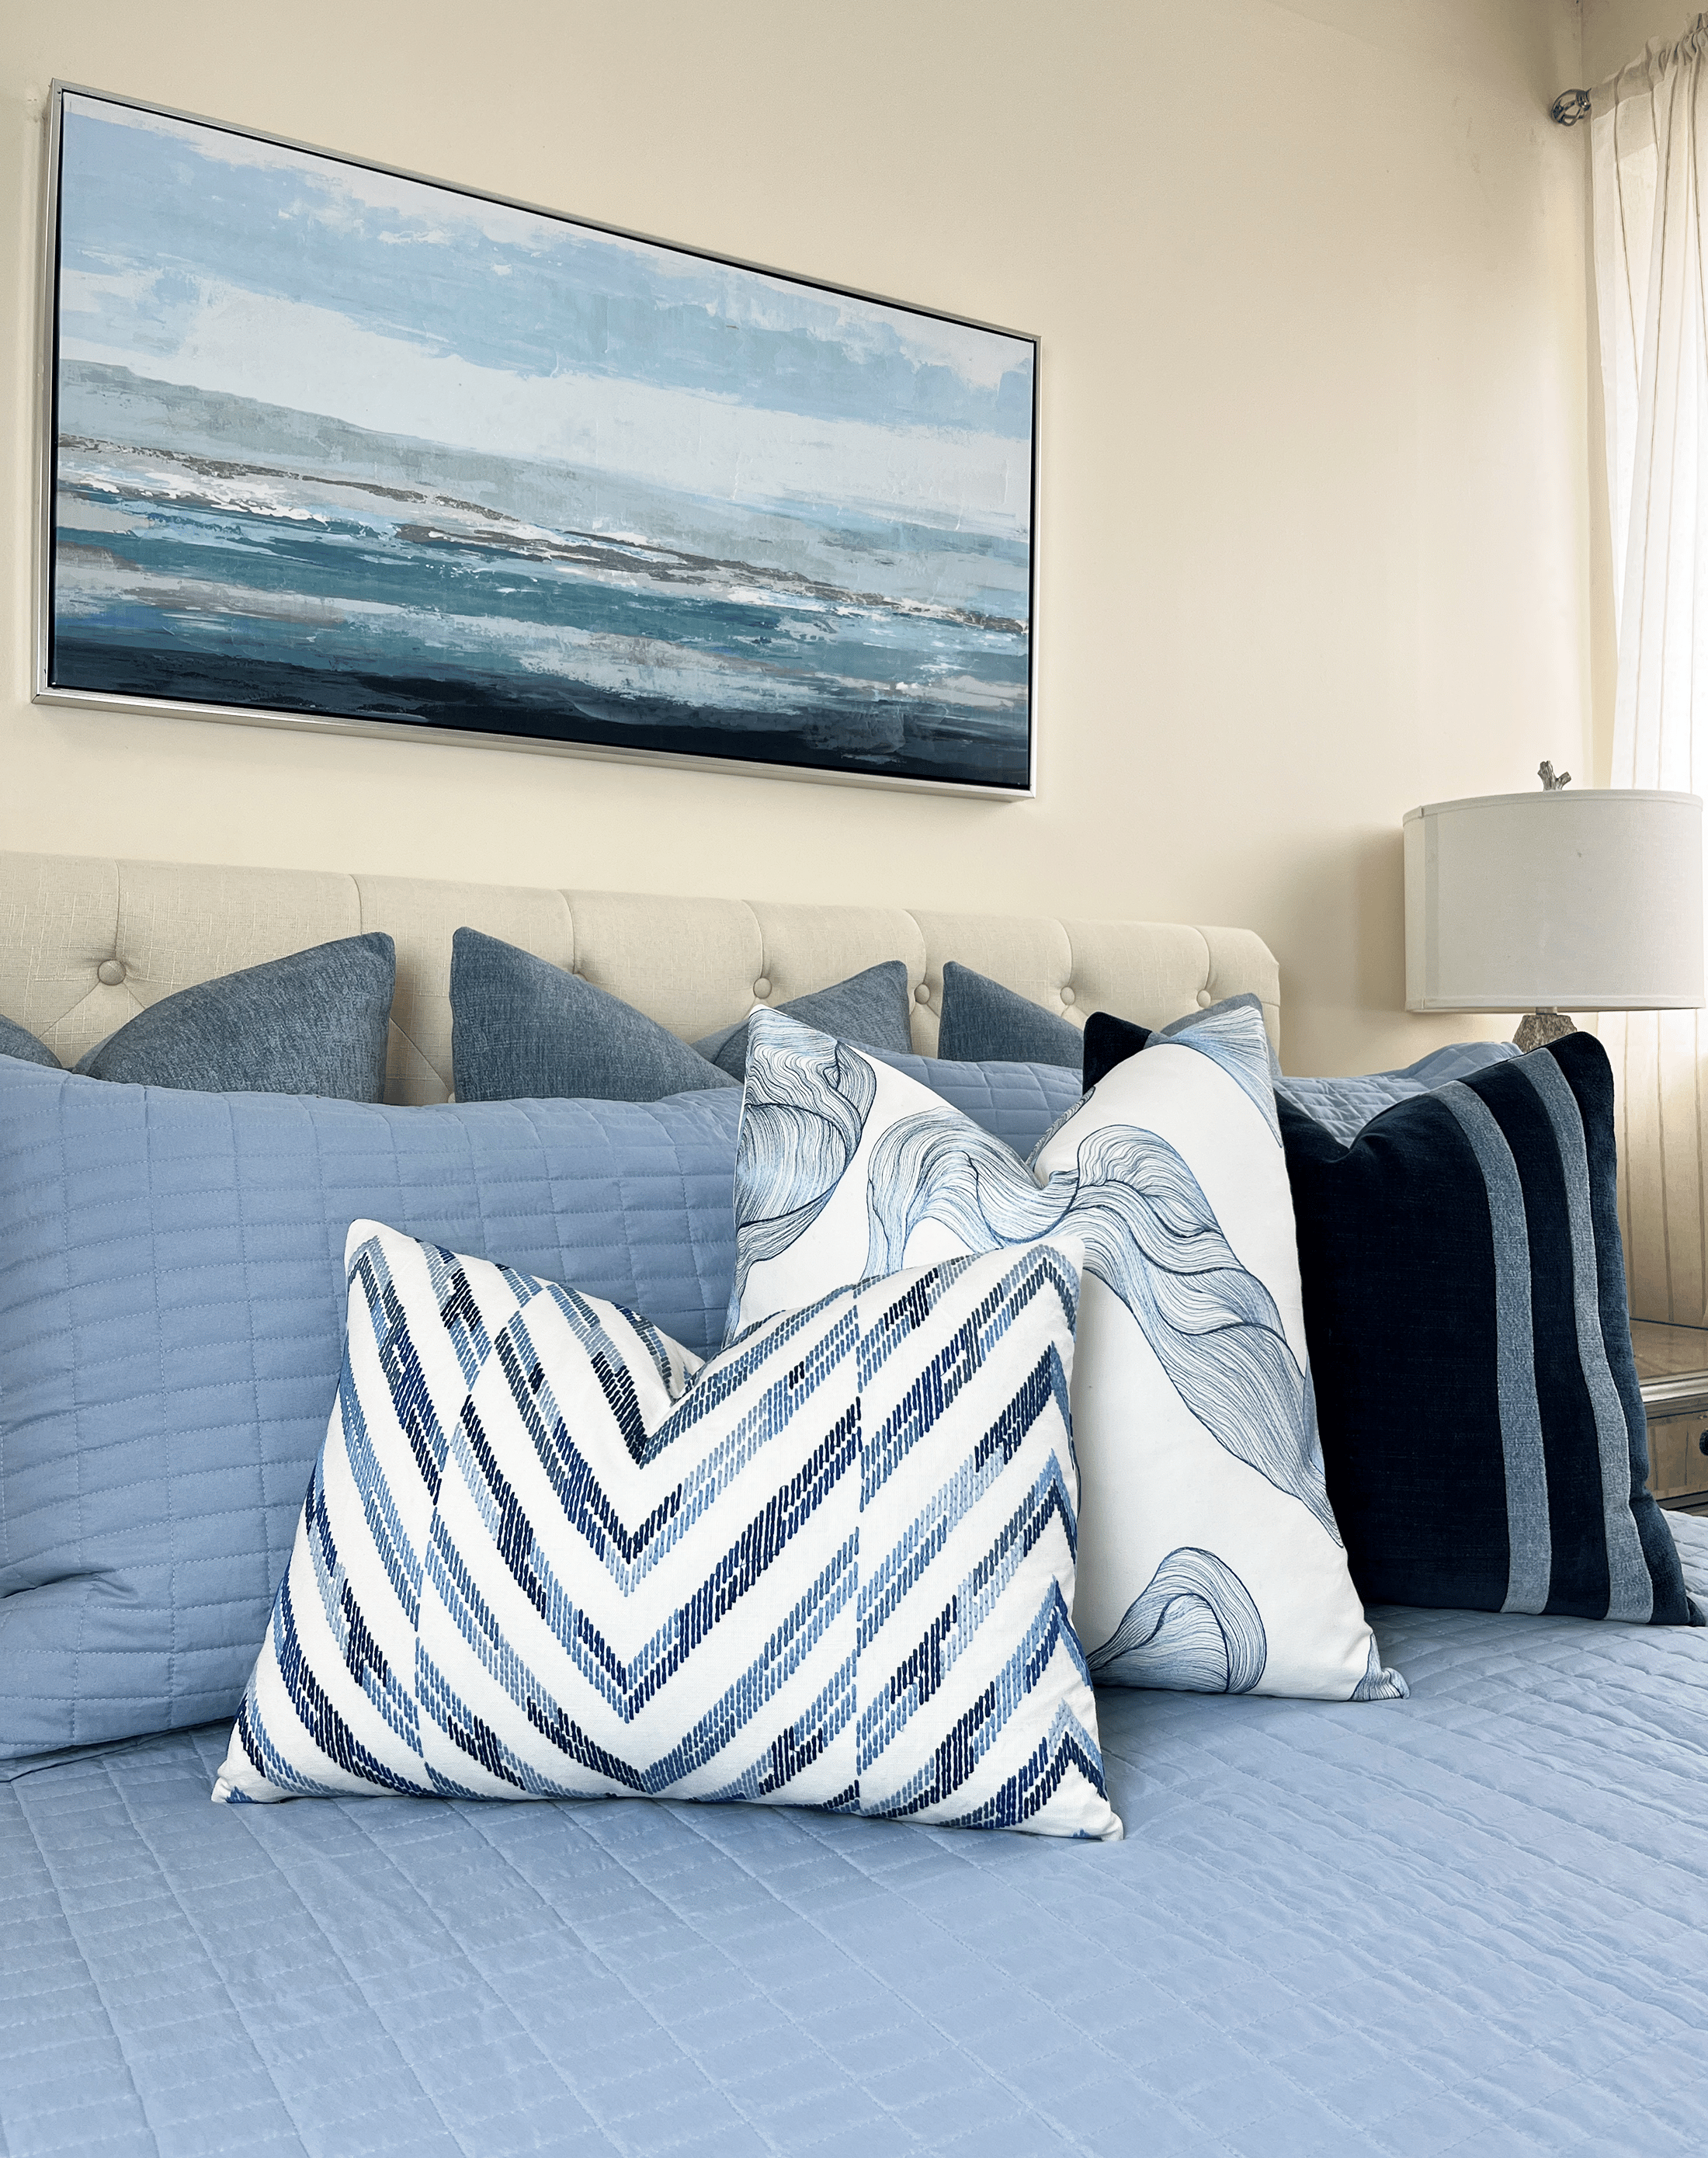 https://smithyhomecouture.com/wp-content/uploads/2022/06/azul-Swirl-bed-with-hamilton-thibaut.png